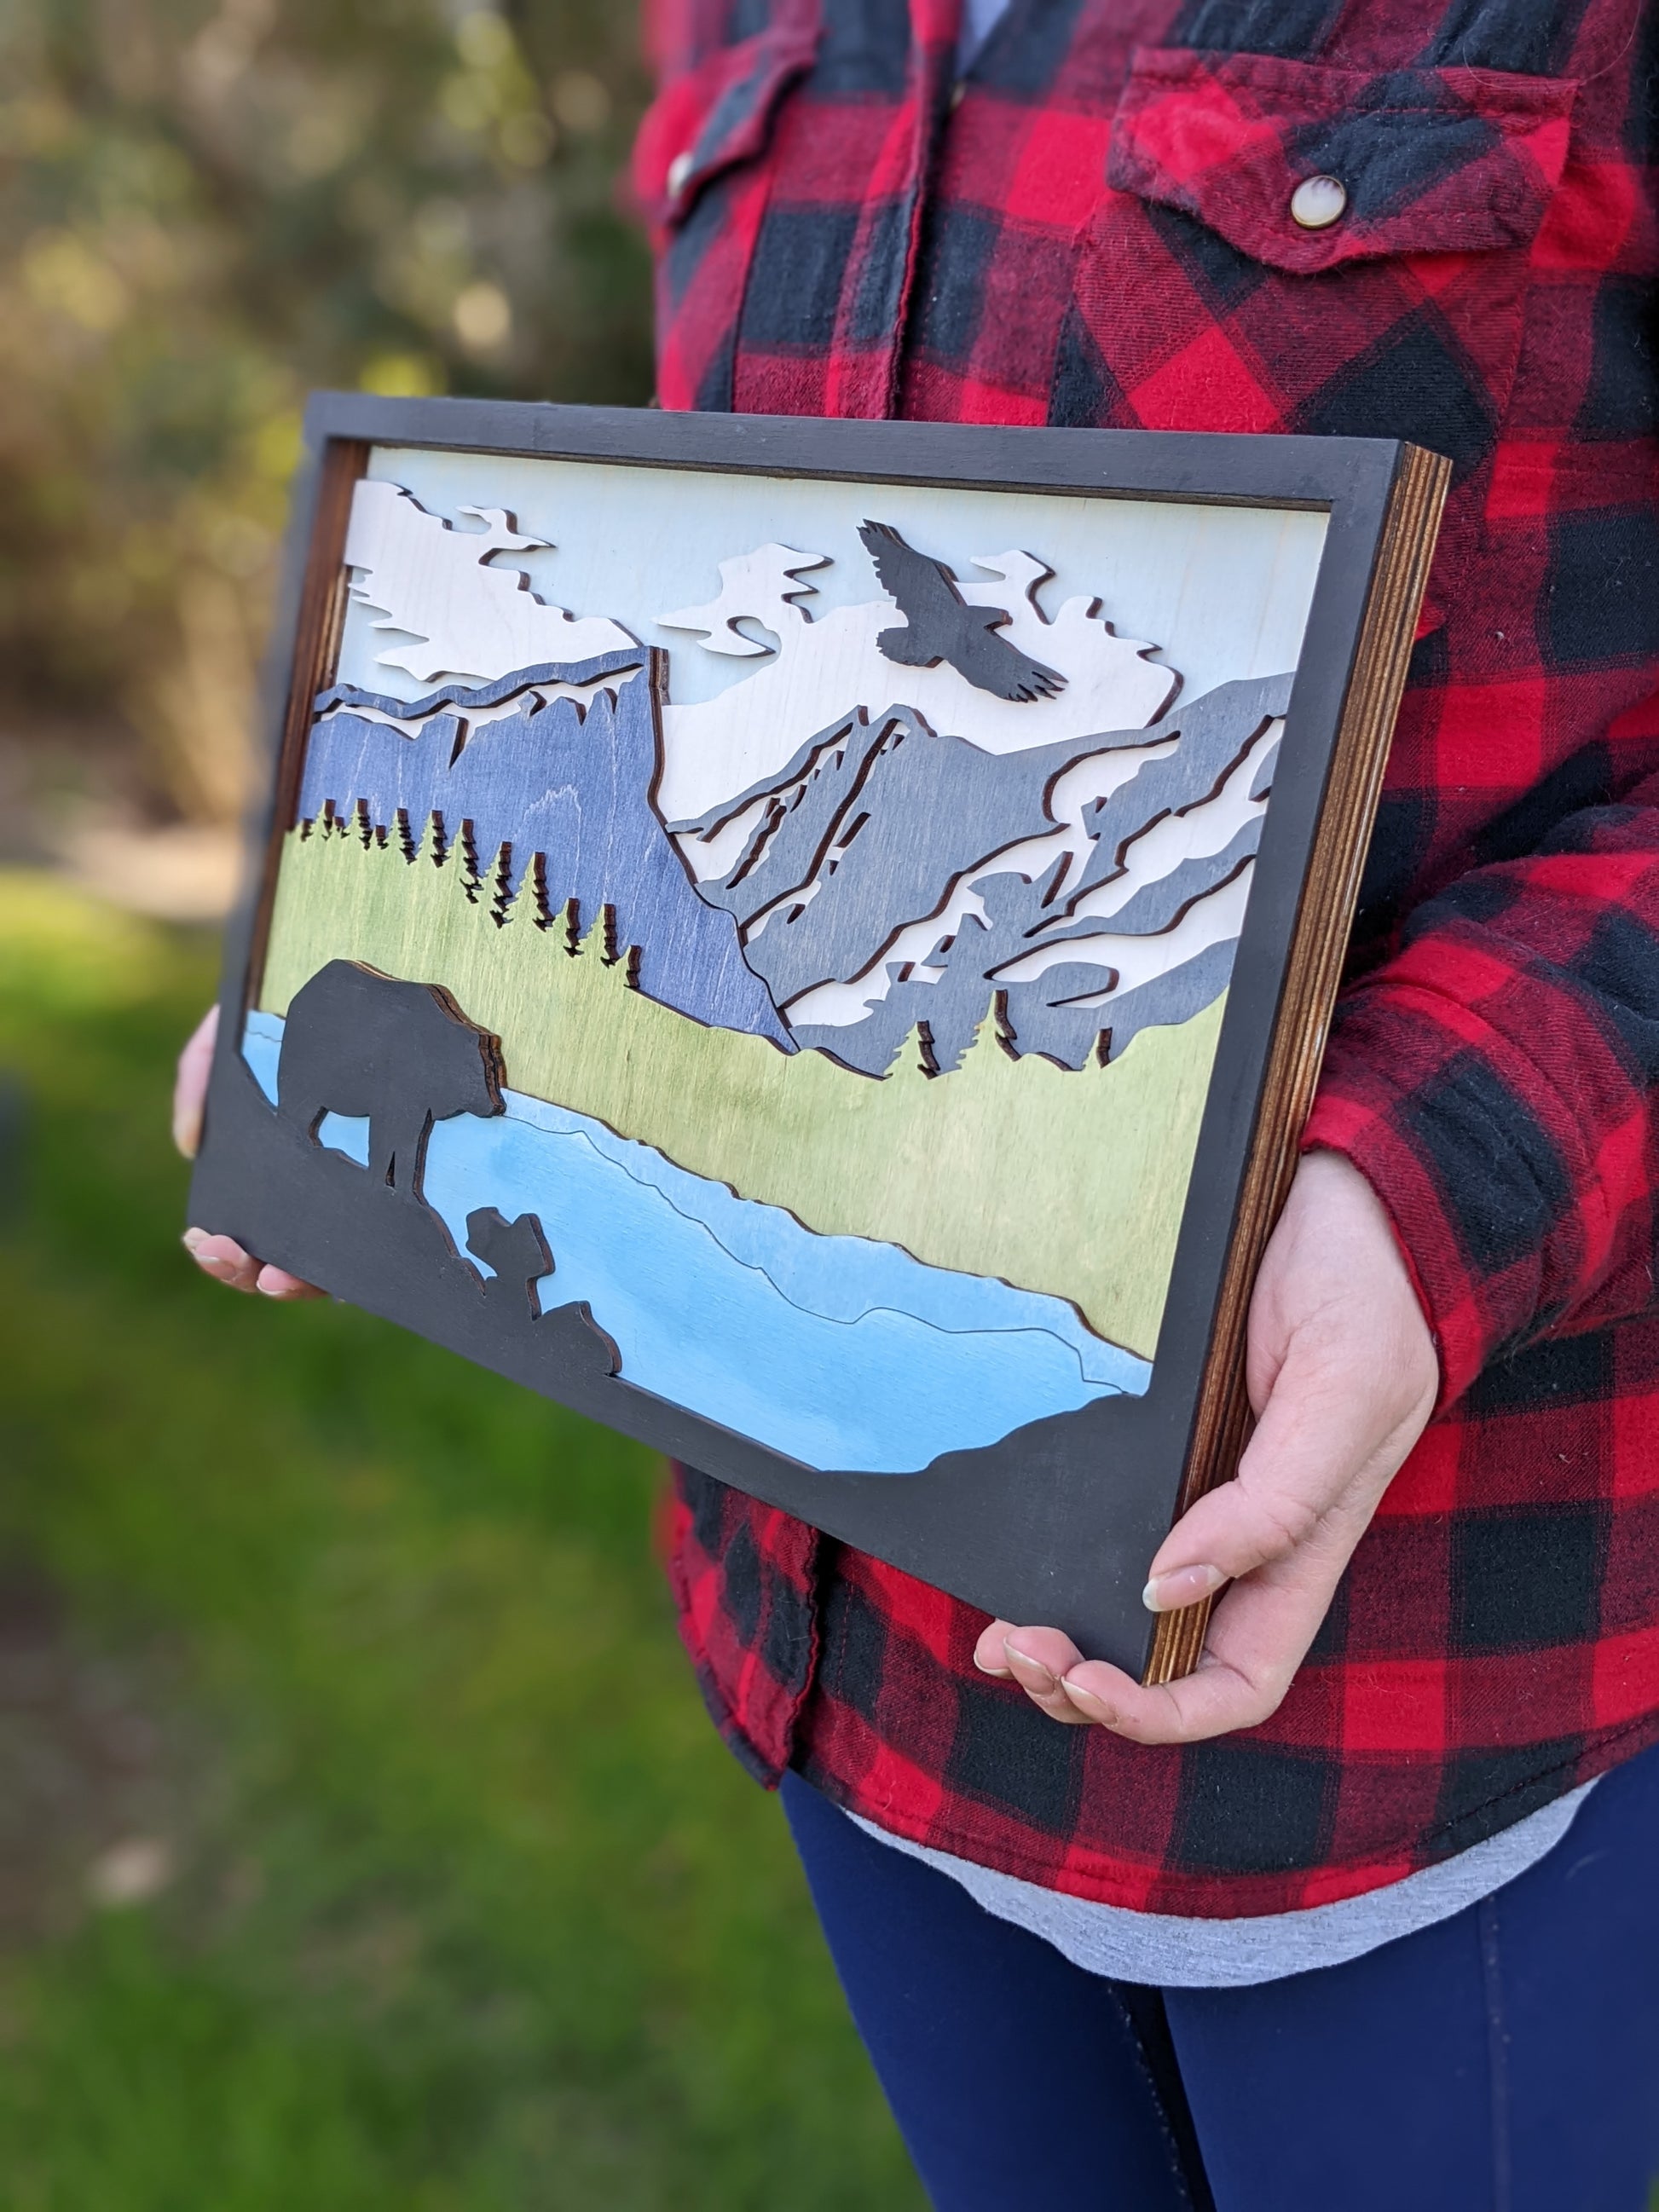 3D Layered bear, river, and mountains scene Artwork 120.00